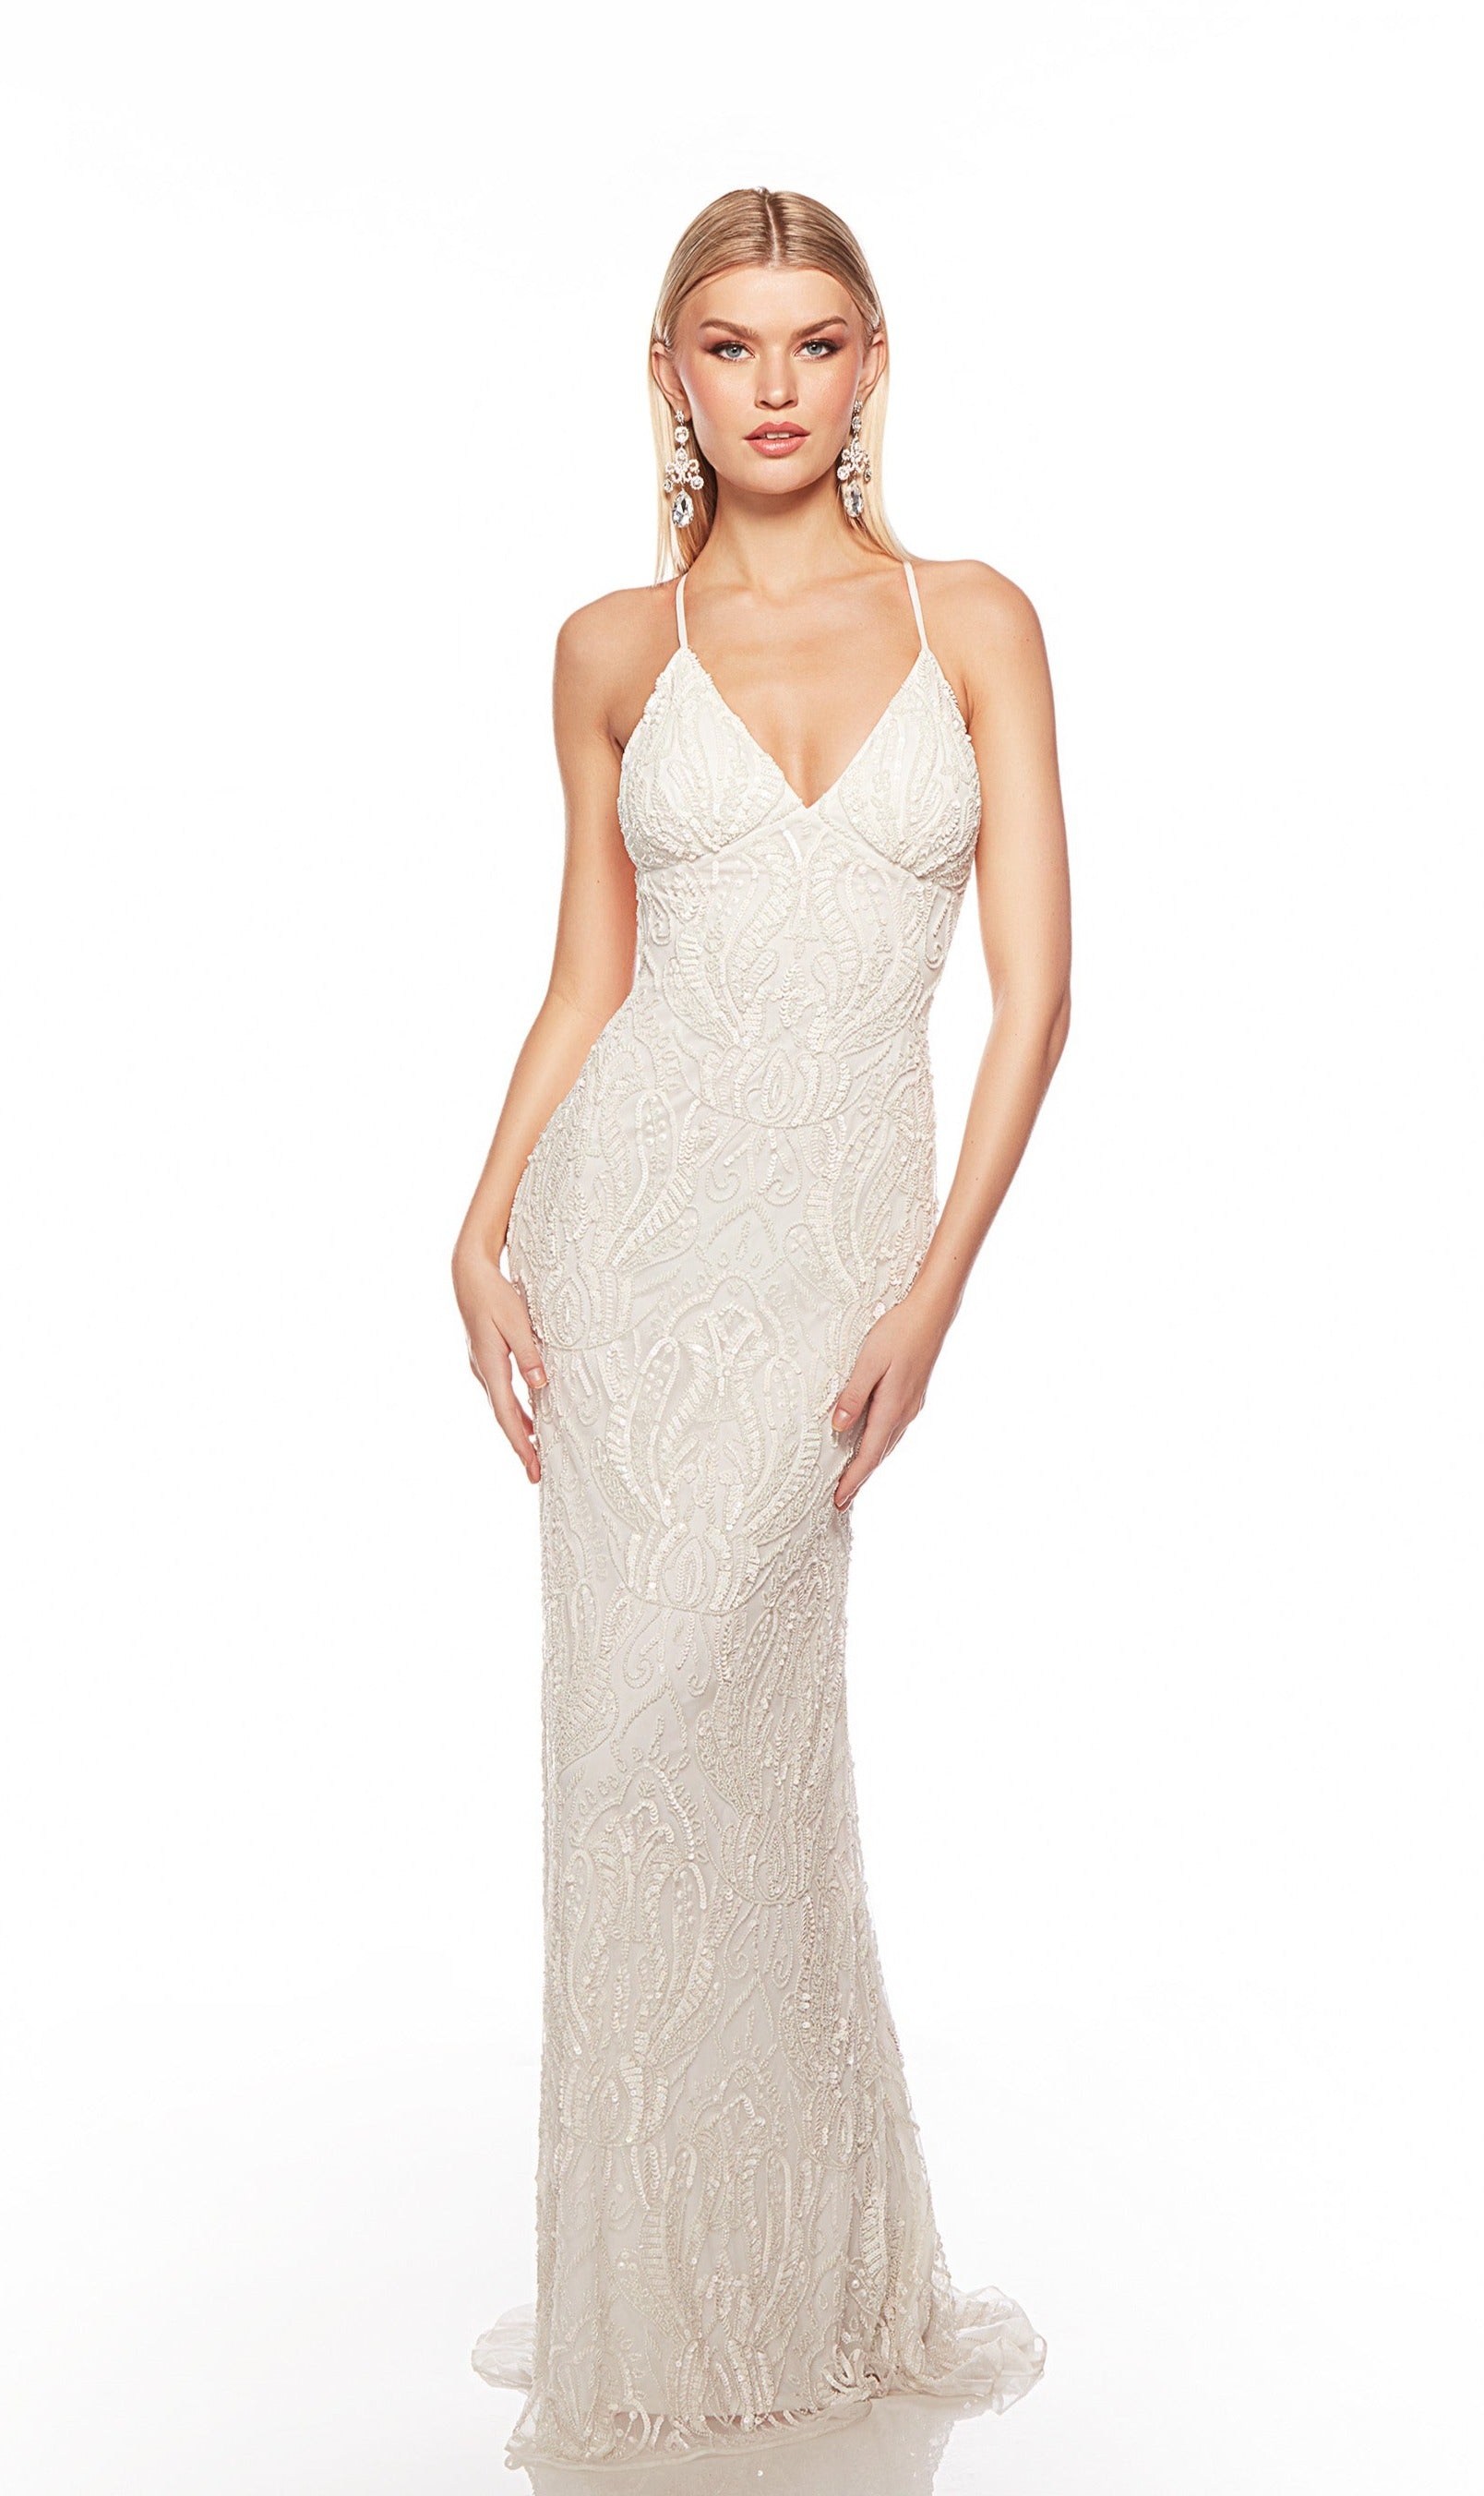 Elegant ivory formal gown: Hand-beaded, V neckline, spaghetti straps, strappy back, and intricate paisley-patterned design for an chic and sophisticated look.